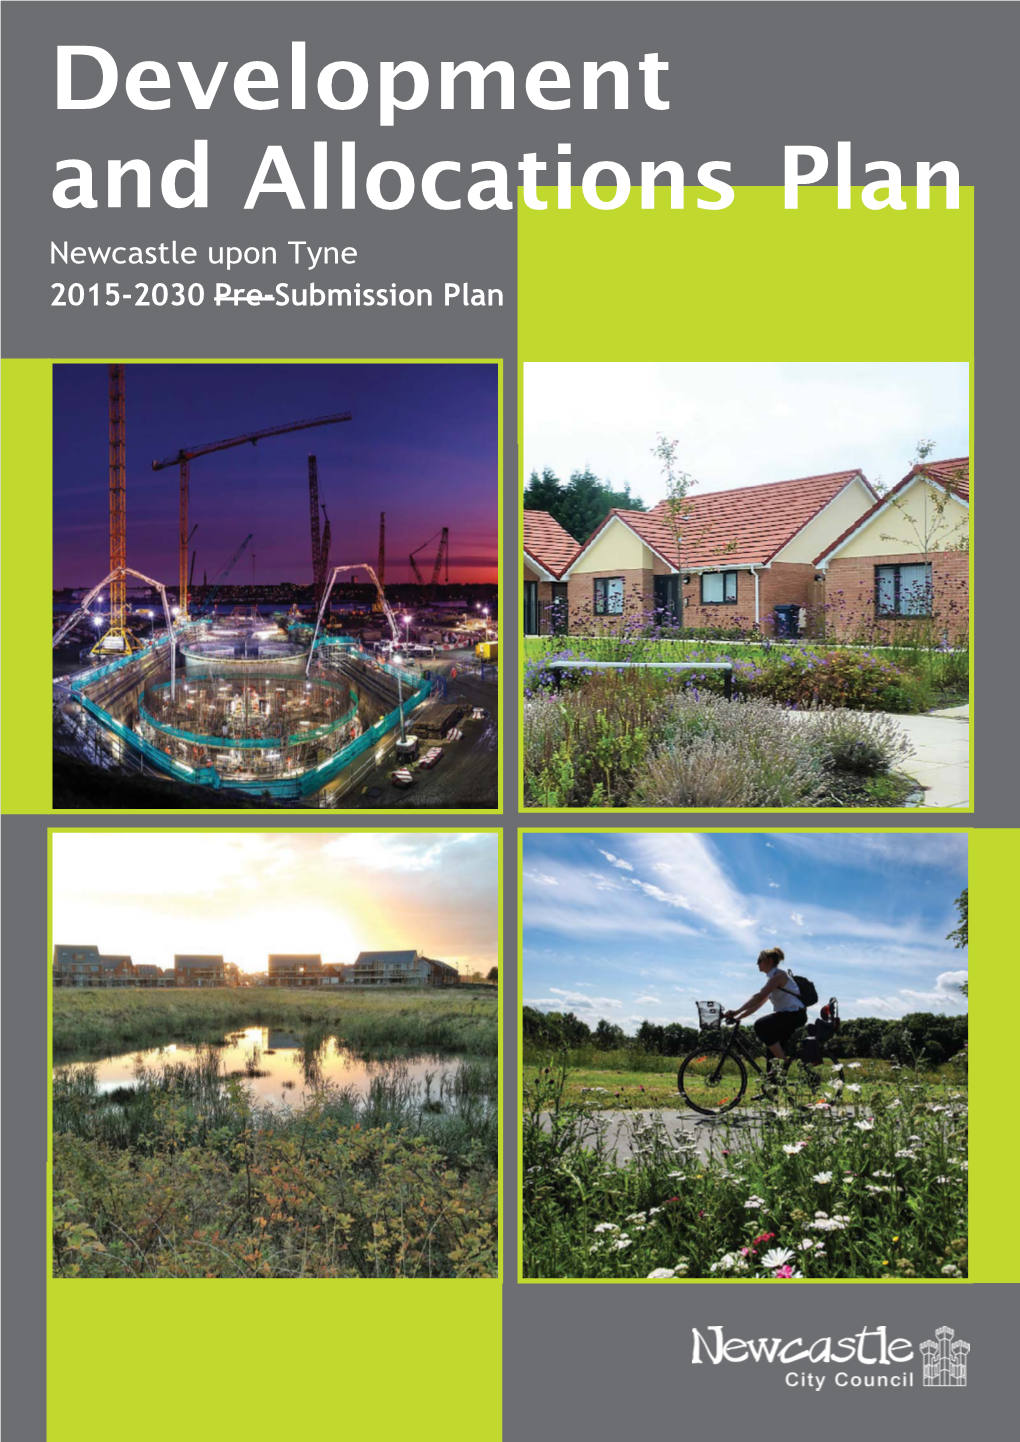 Development and Allocations Plan Newcastle Upon Tyne 2015-2030 Pre-Submission Plan